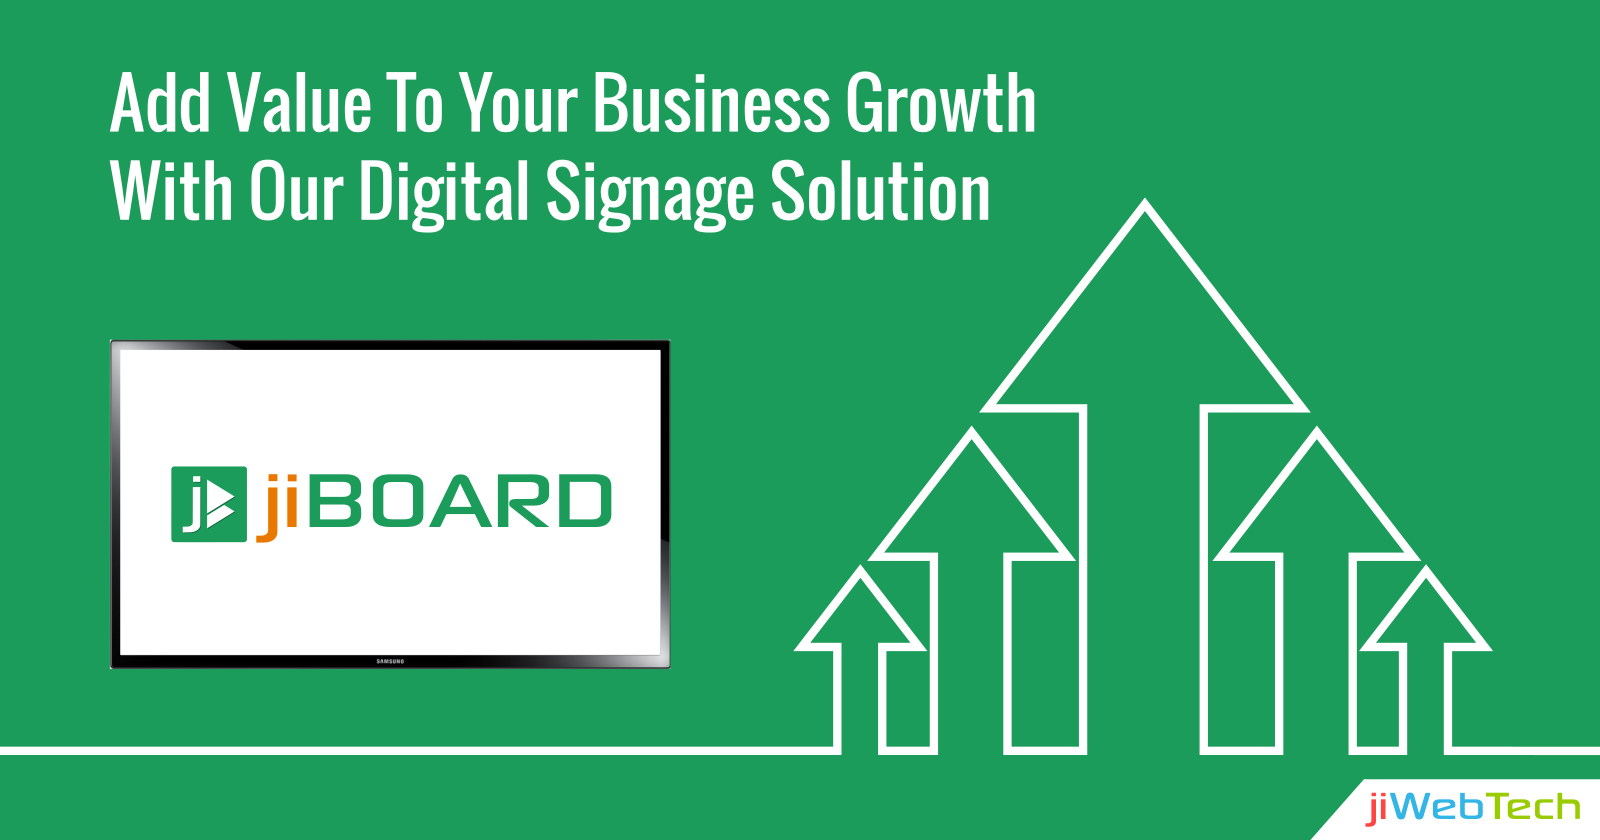 Add Value To Your Business Growth With Our Digital Signage Solution